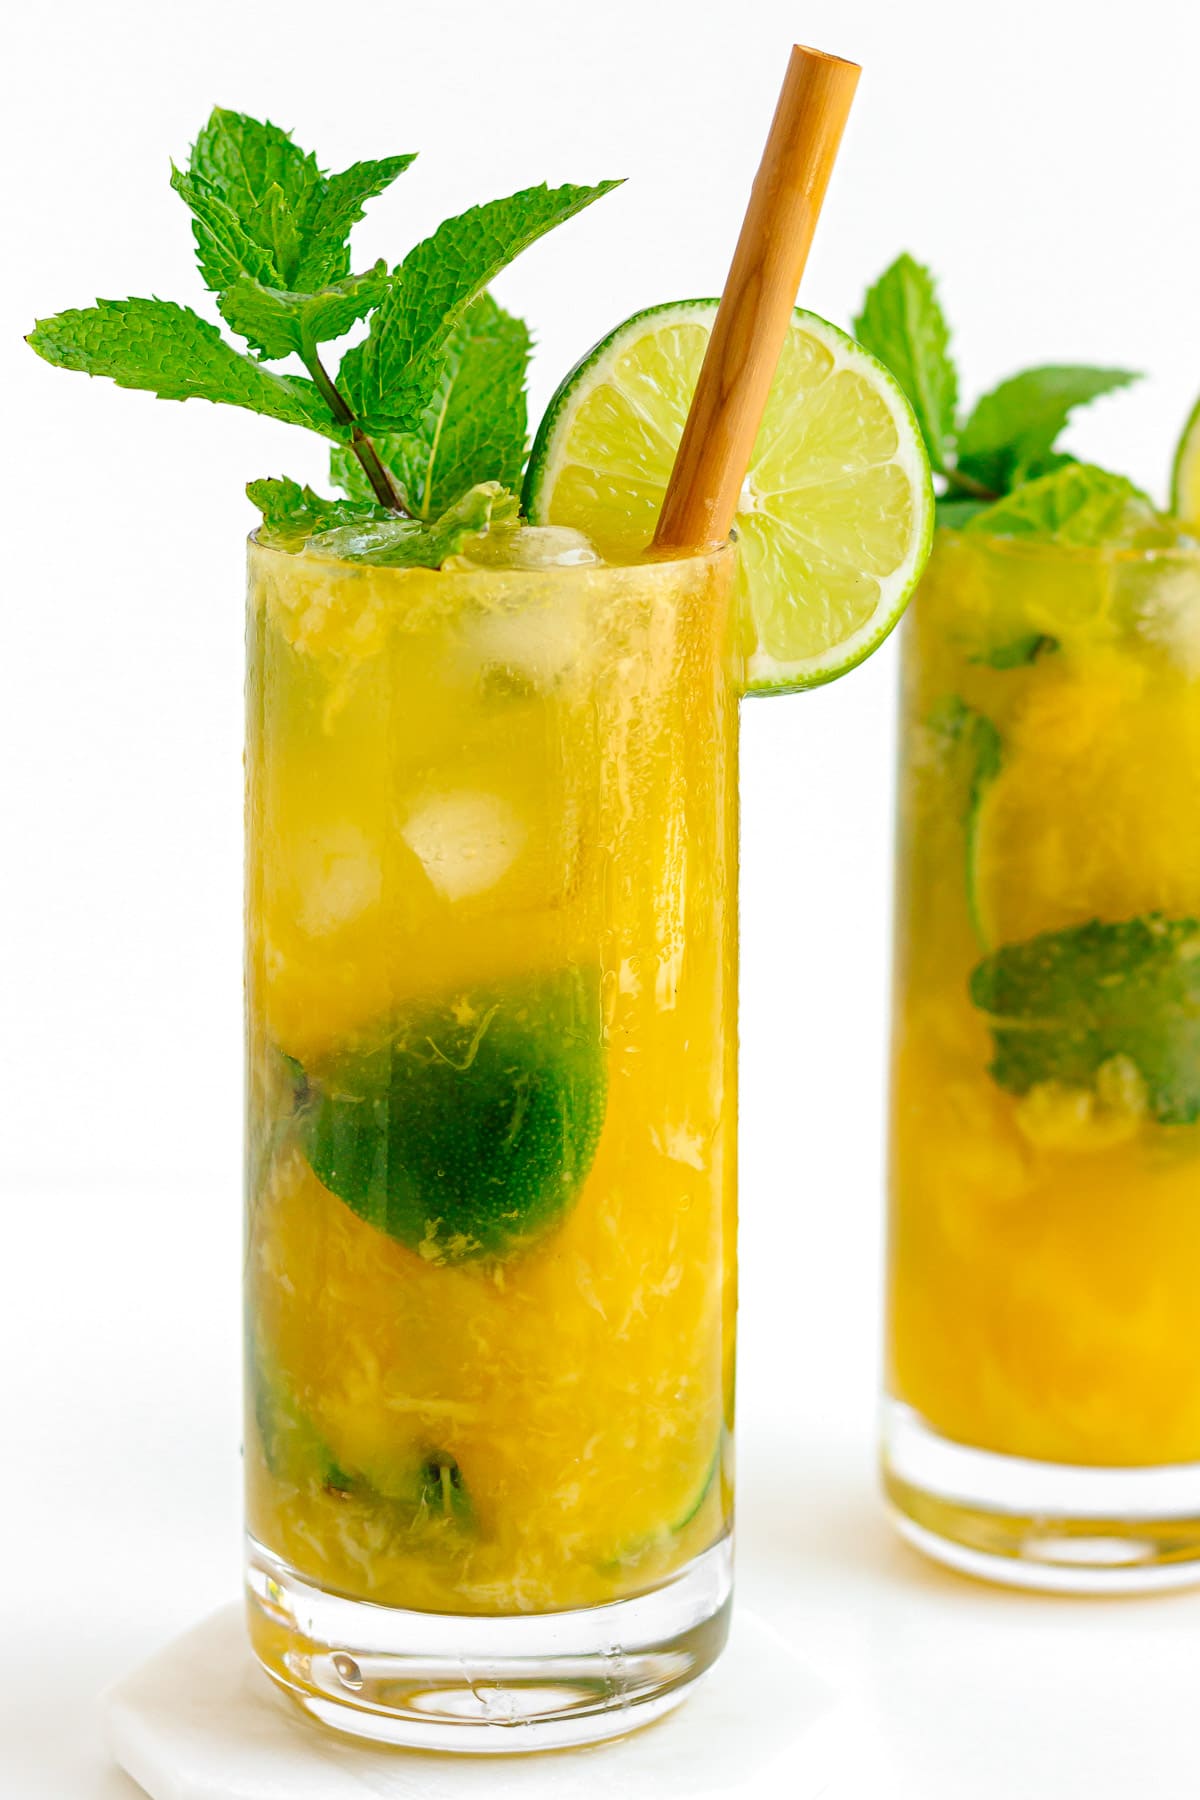 Two glasses of mango mojito cocktail garnished with fresh mint and slice of lime.